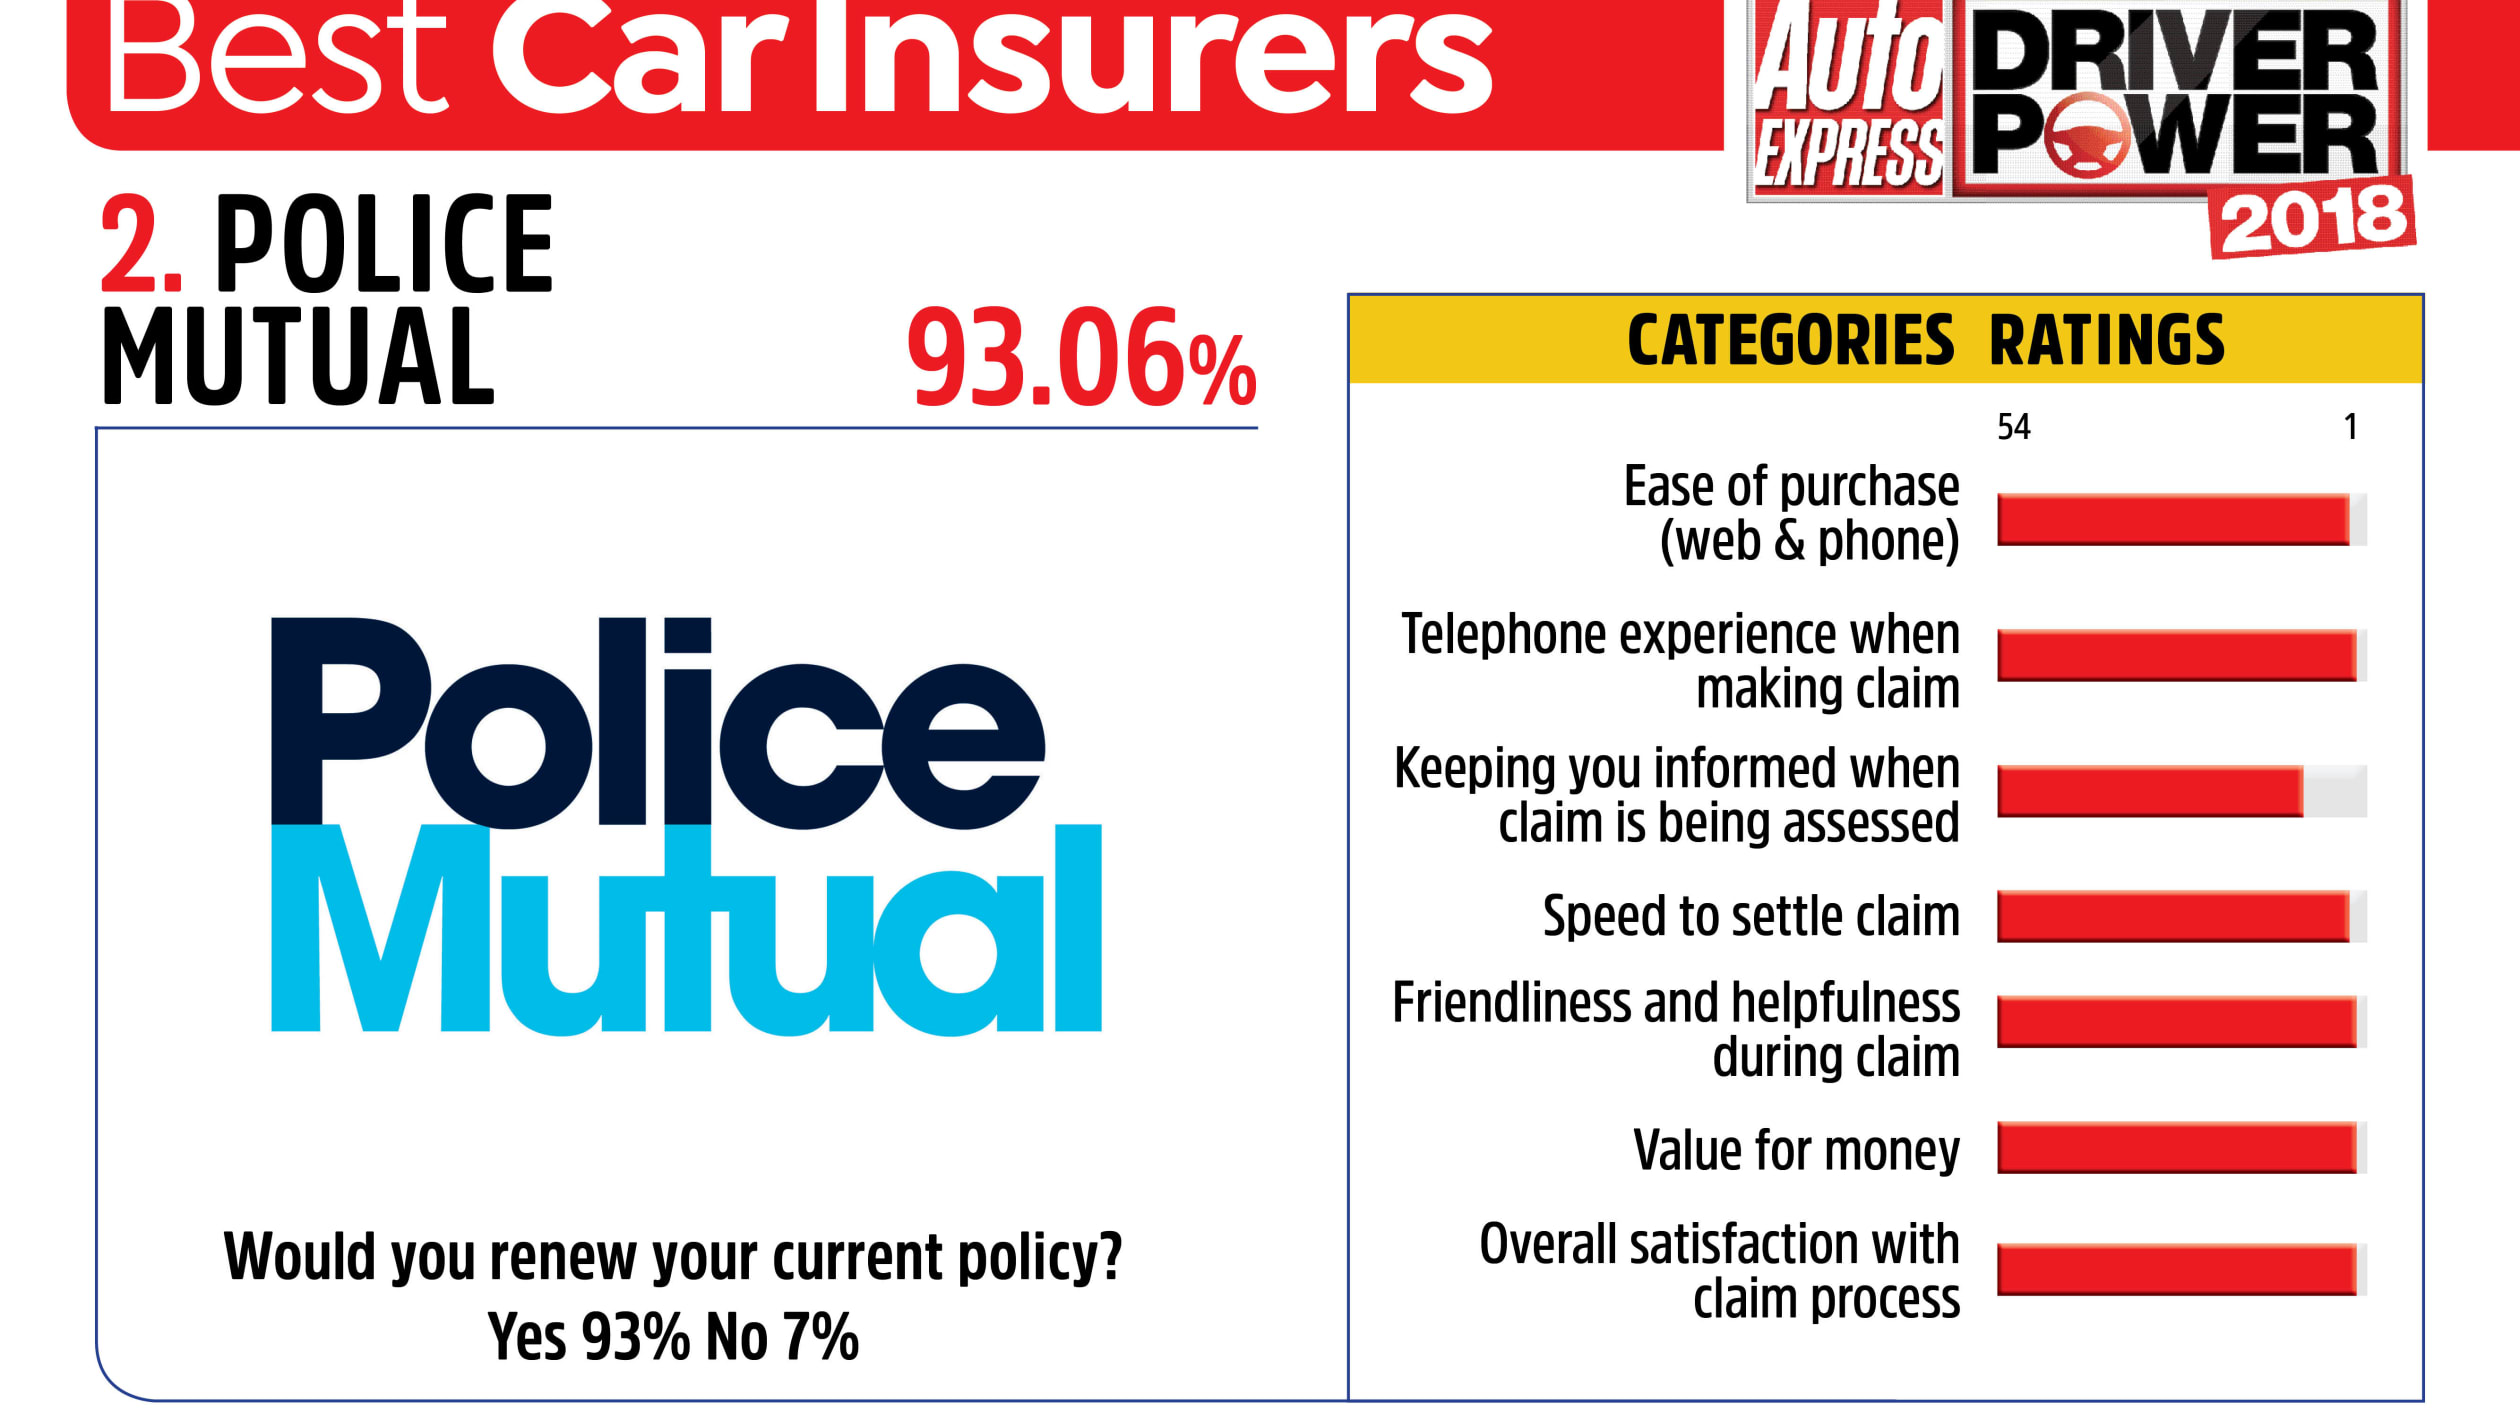 Best car insurance companies 2018 - pictures | Auto Express